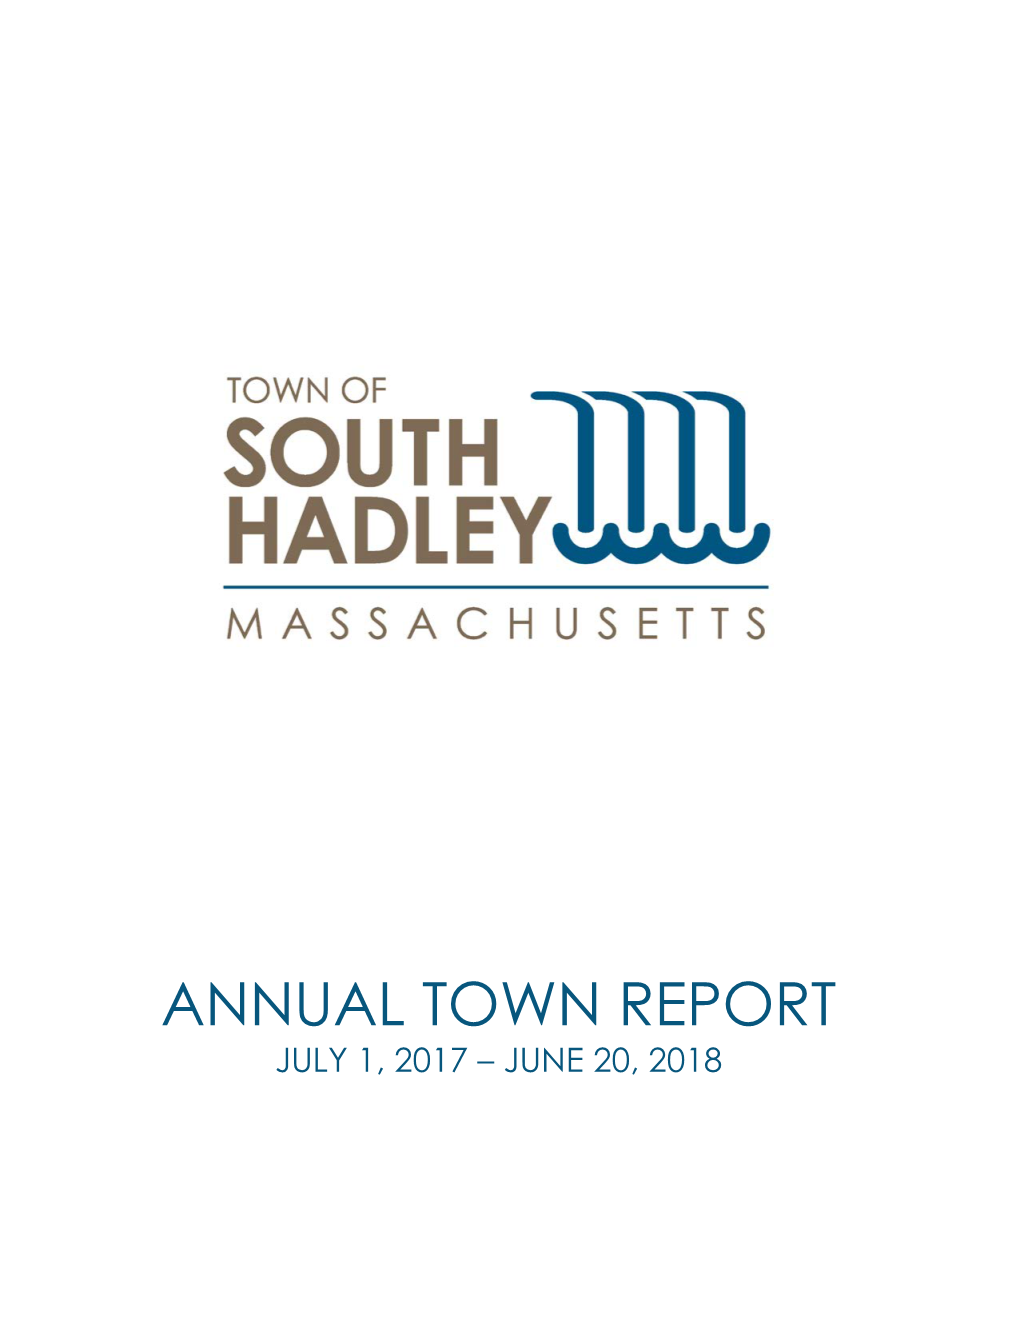 Town of South Hadley Annual Town Report July 1, 2017 – June 30, 2018